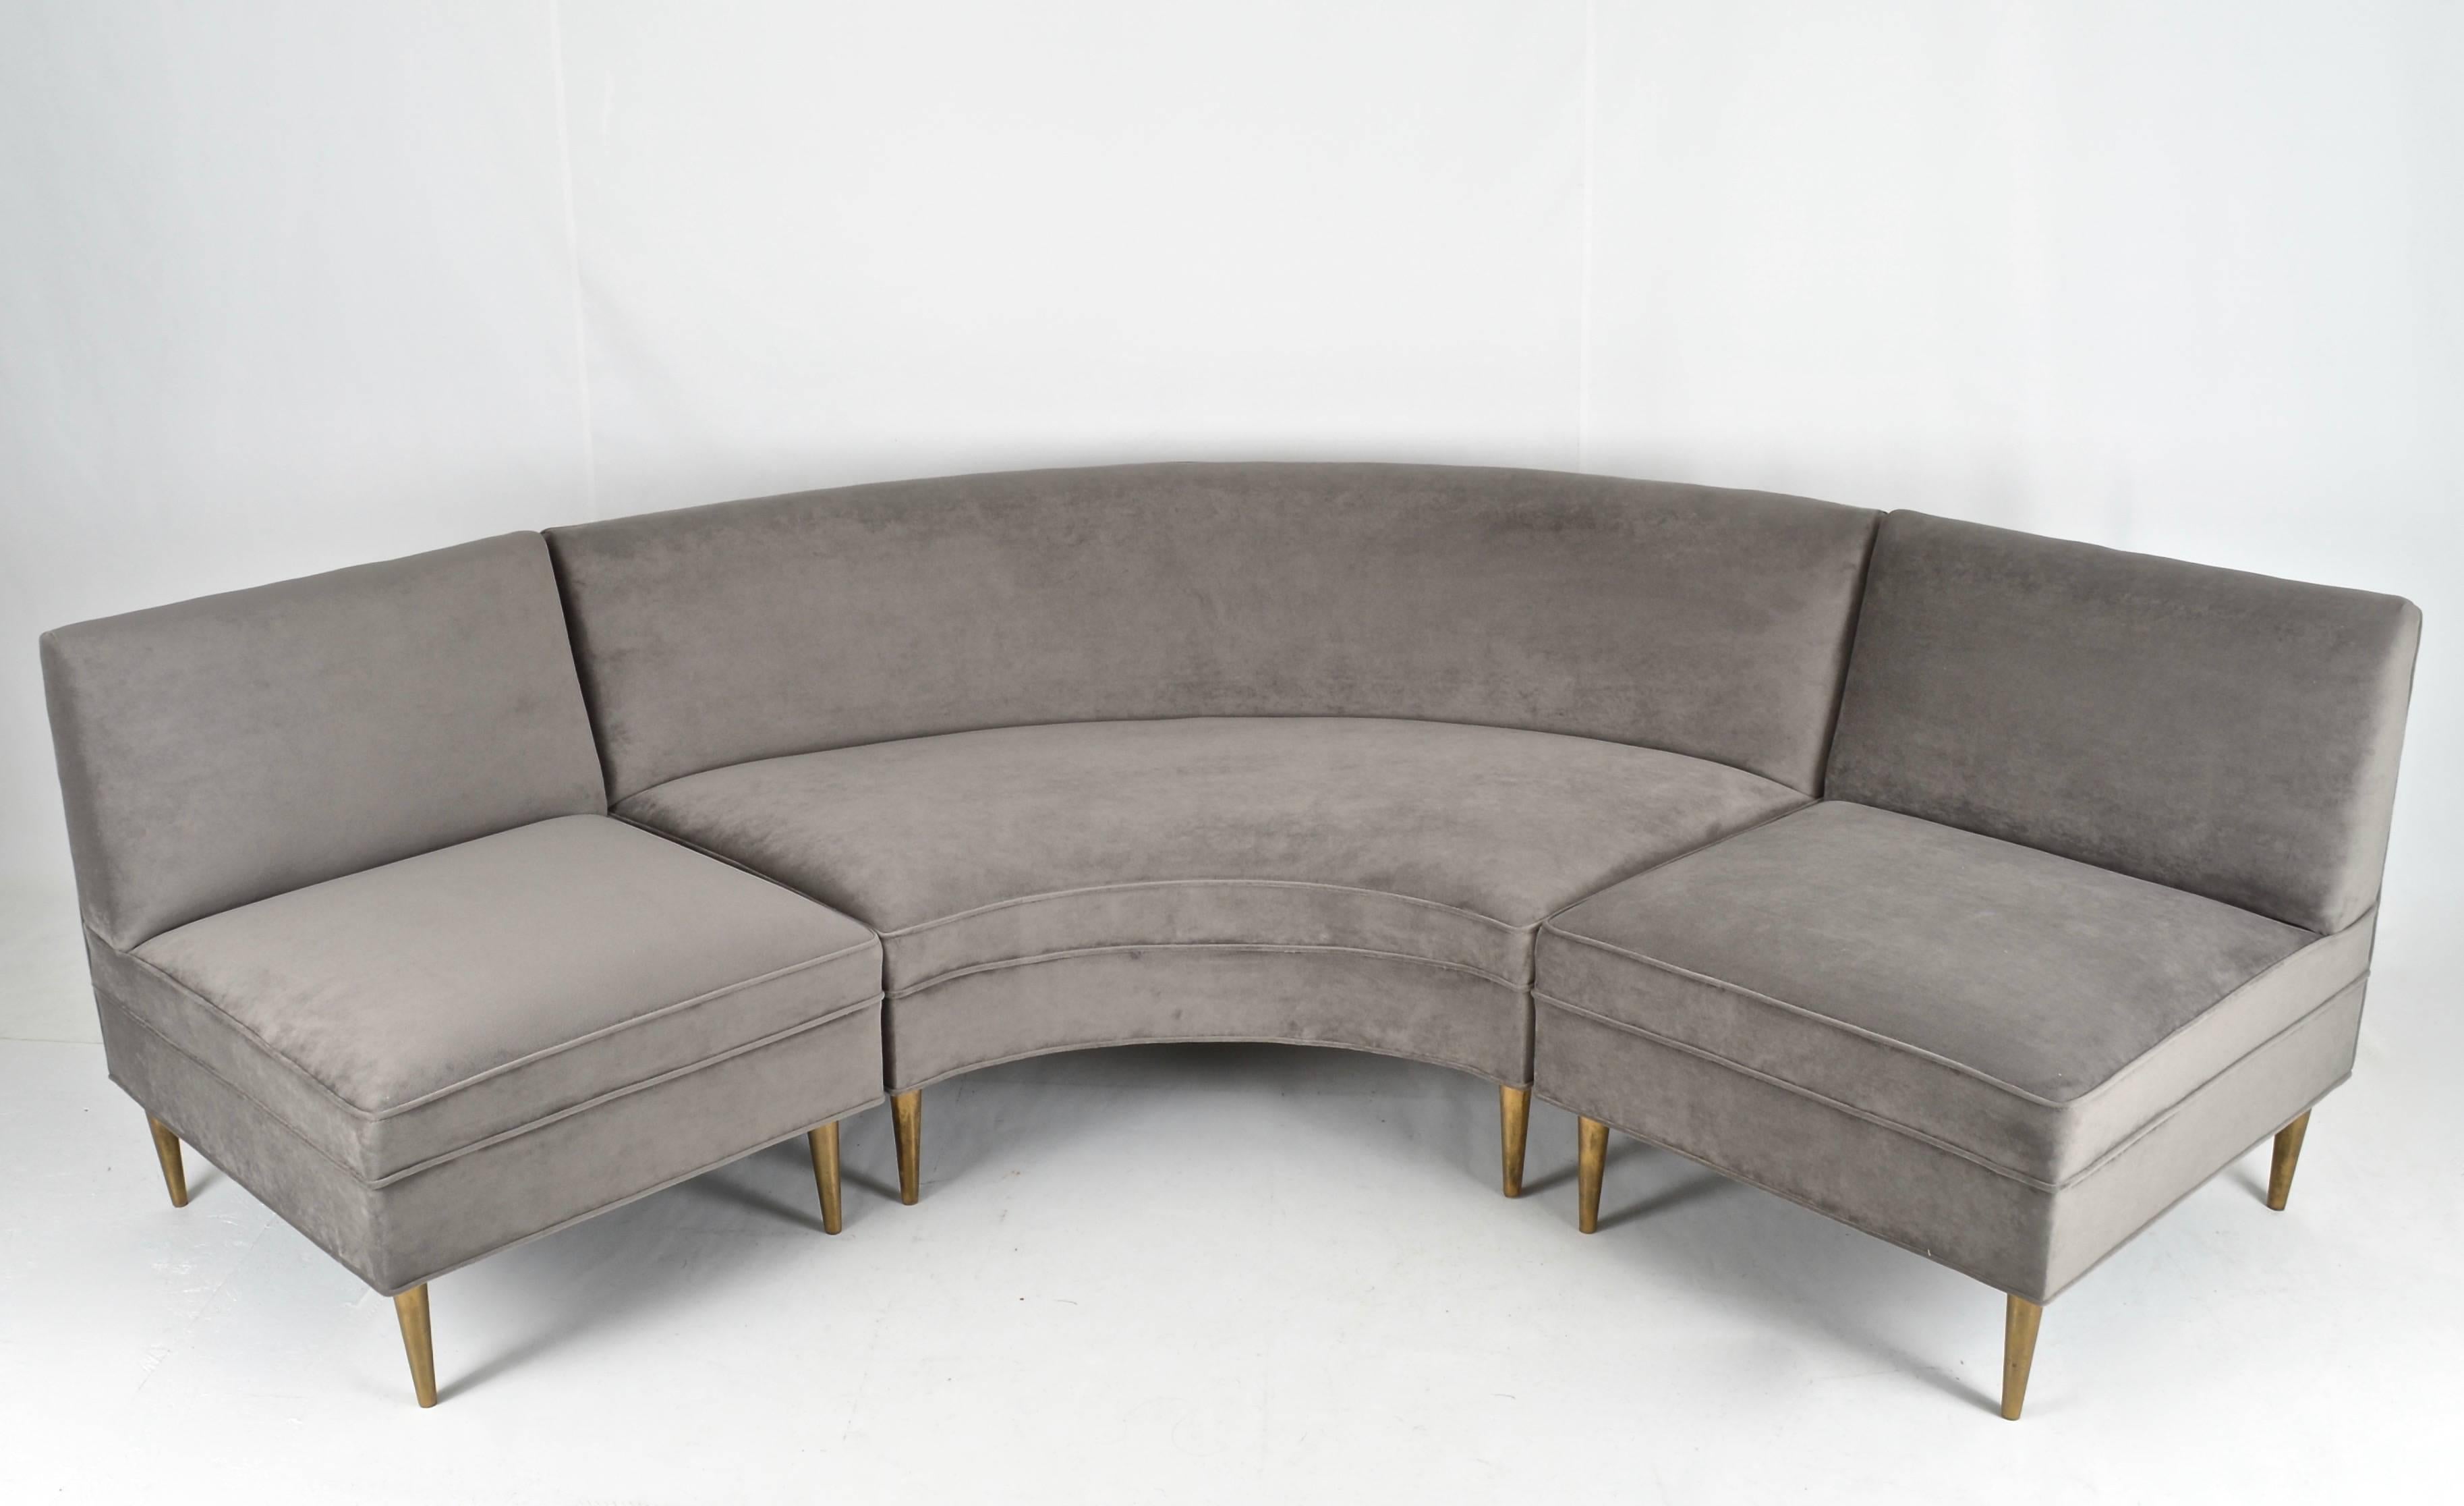 Wonderful scale on this relatively petite sofa. Tight seat and back, reupholstered in taupe velvet. Gold-finished metal legs with sophisticated tapered form.